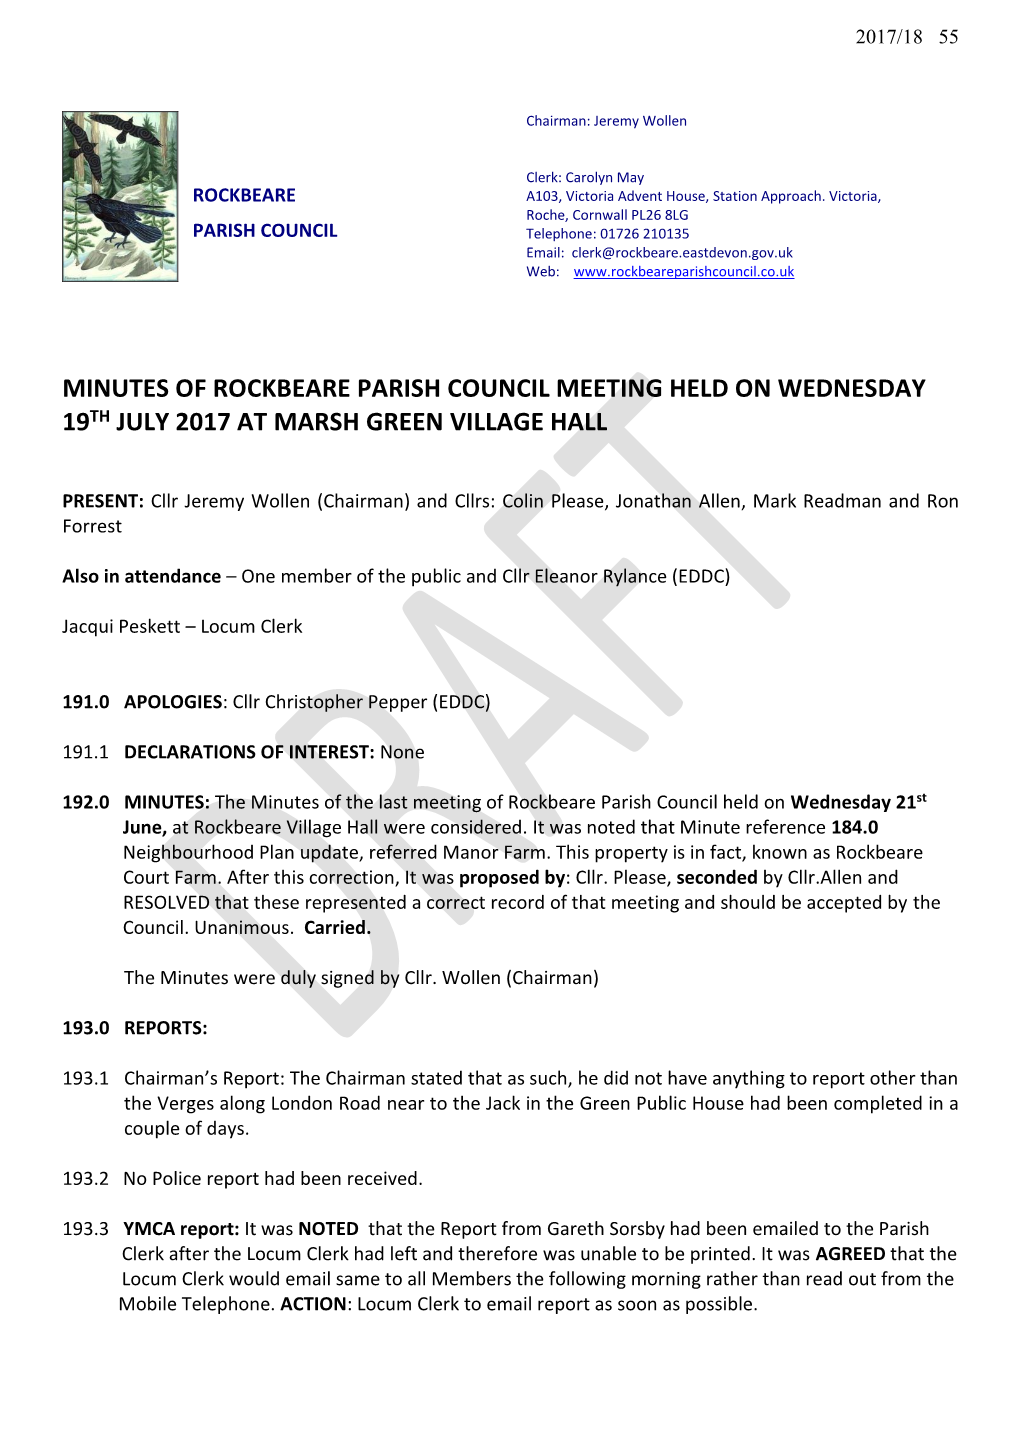 Minutes of Rockbeare Parish Council Meeting Held on Wednesday 19Th July 2017 at Marsh Green Village Hall